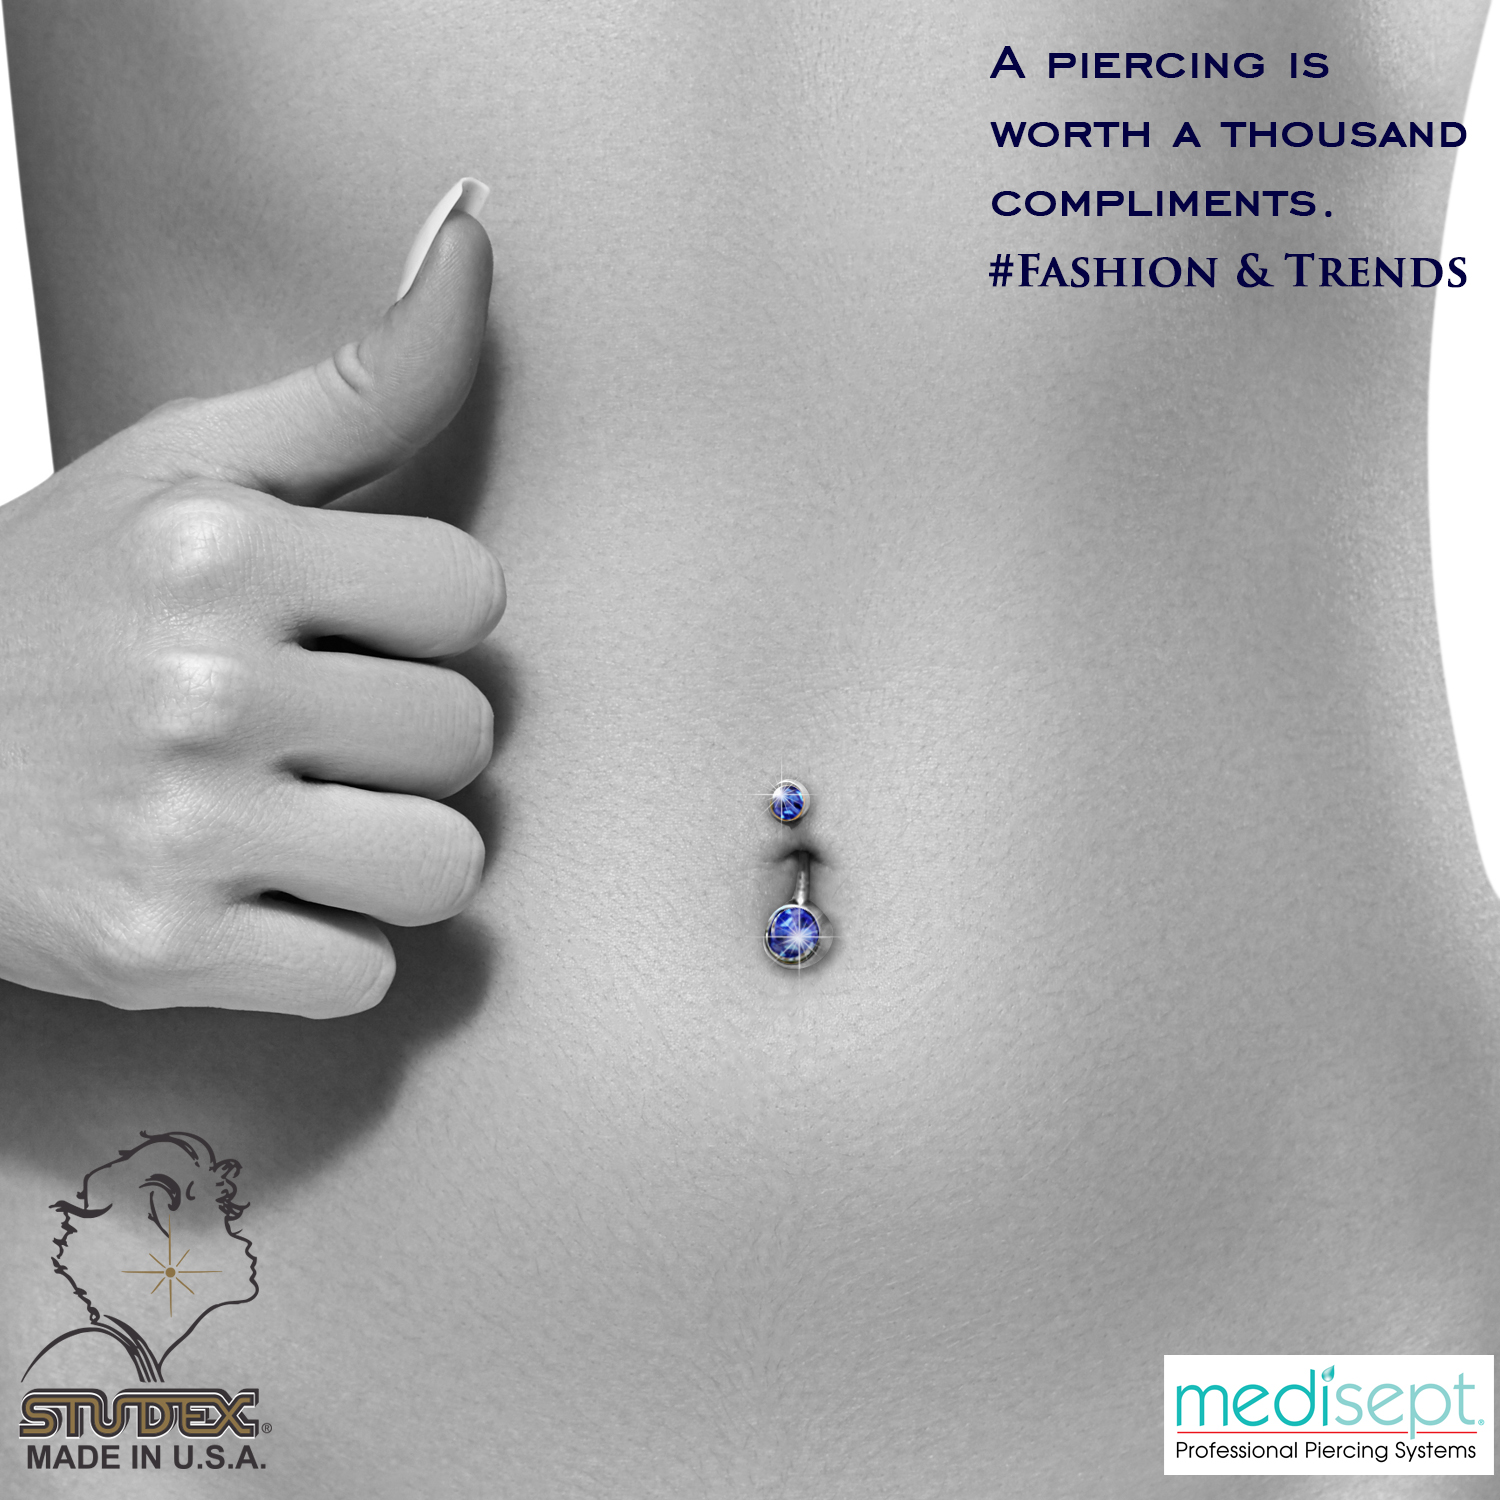 A piercing is worth a thousand compliments! #fashionandtrends. To give orders mail us at sales@studex.in